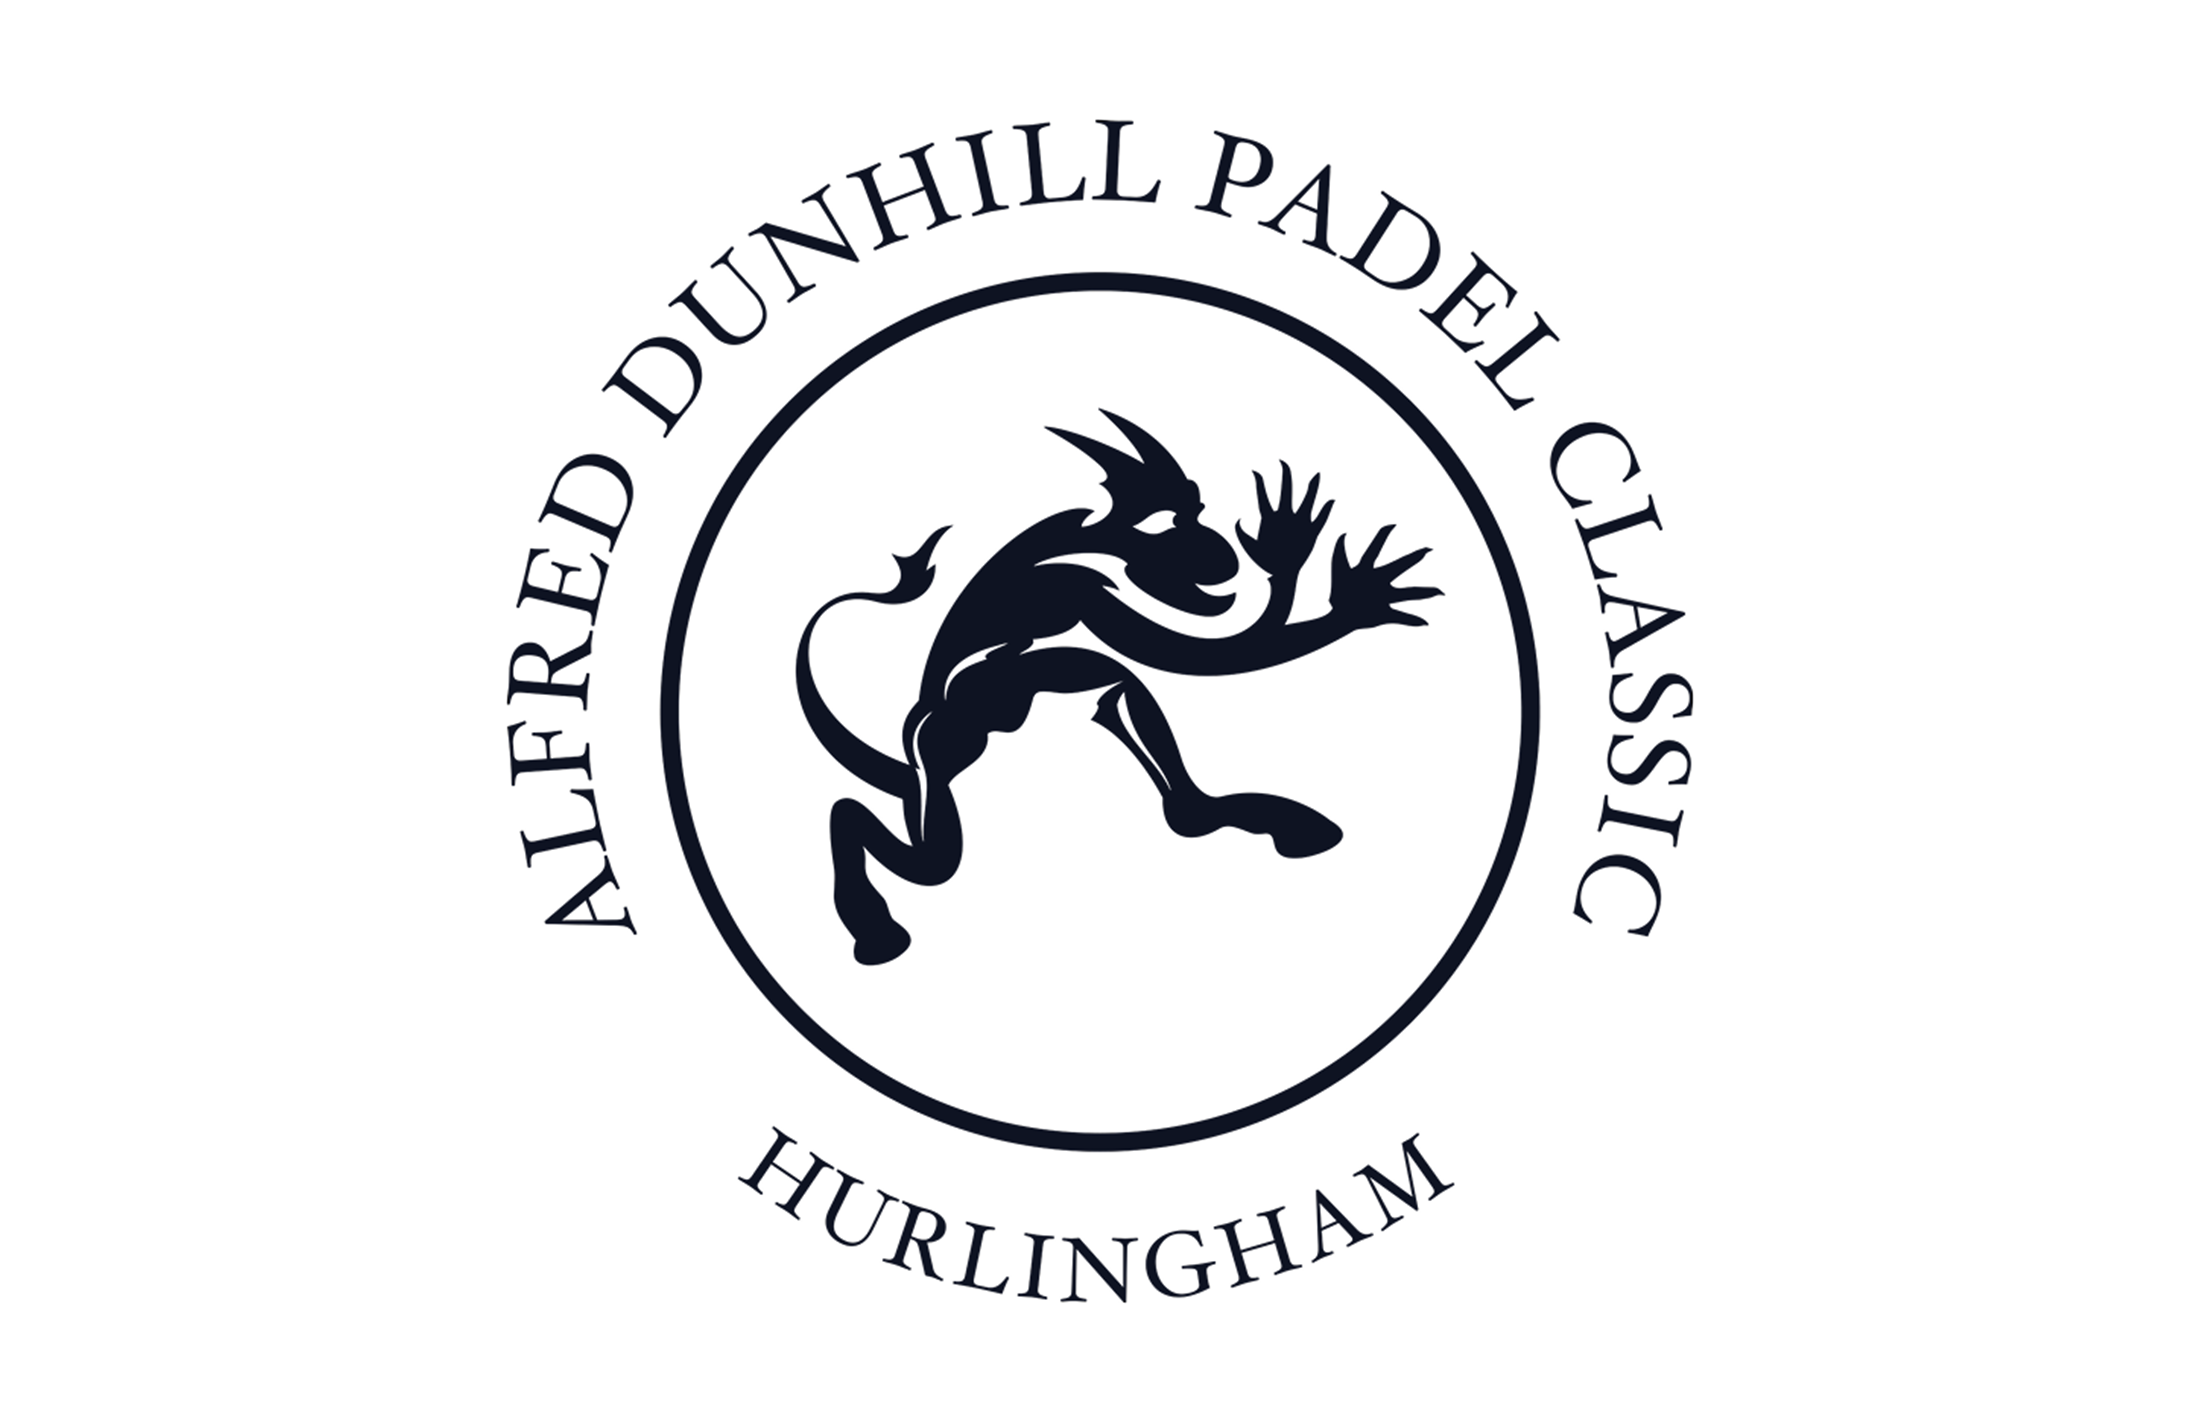 ALFRED DUNHILL PADEL CLASSIC